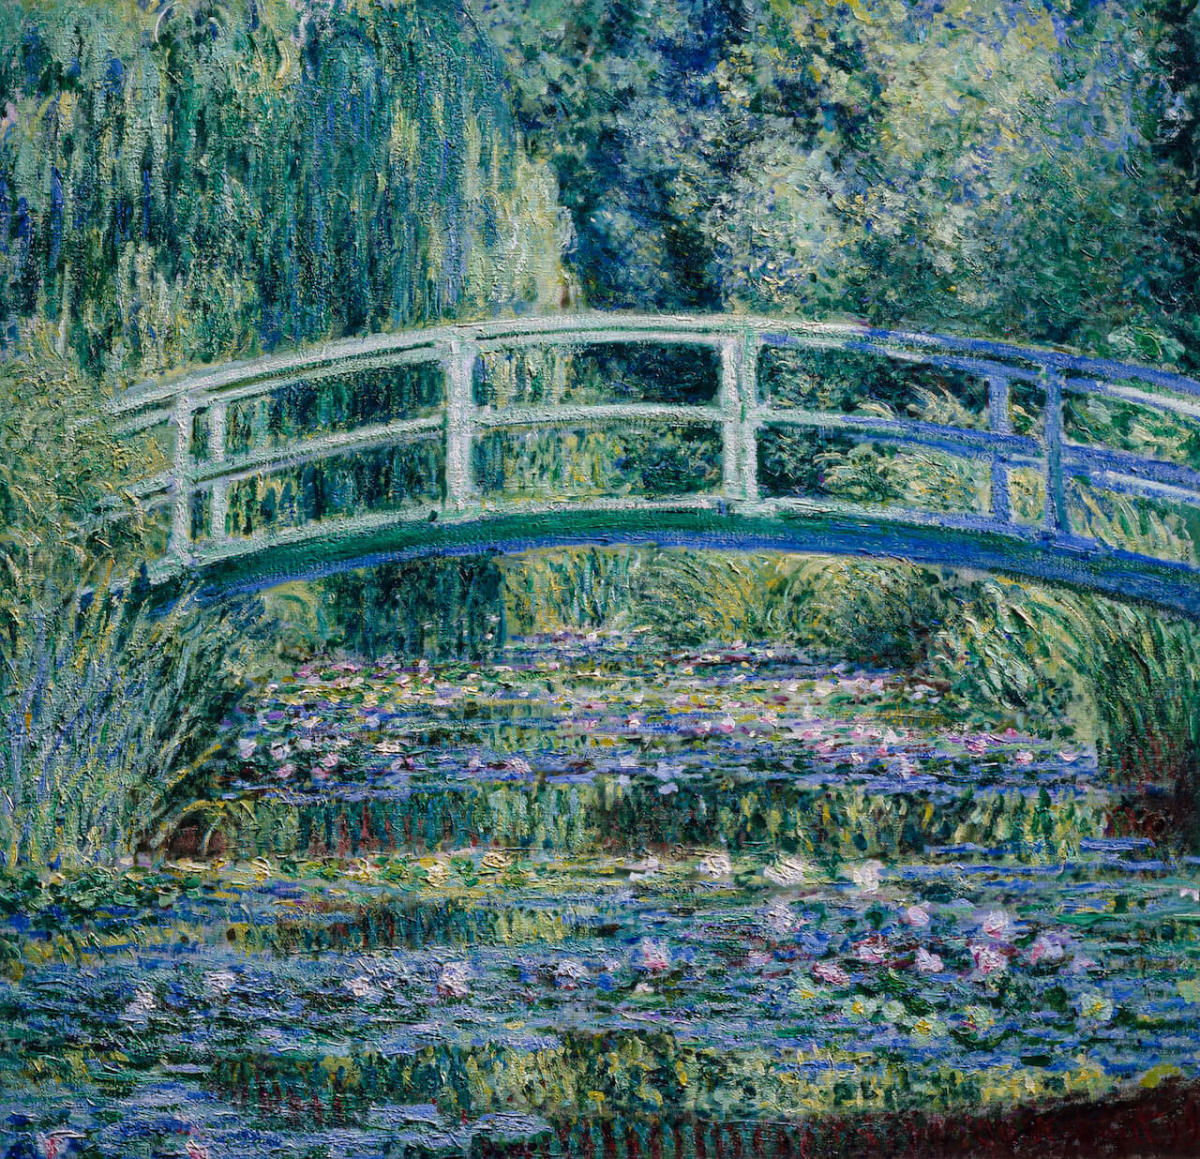 Impressionist painter Claude Monet's Water Lillies and Japanese Bridge painting. 